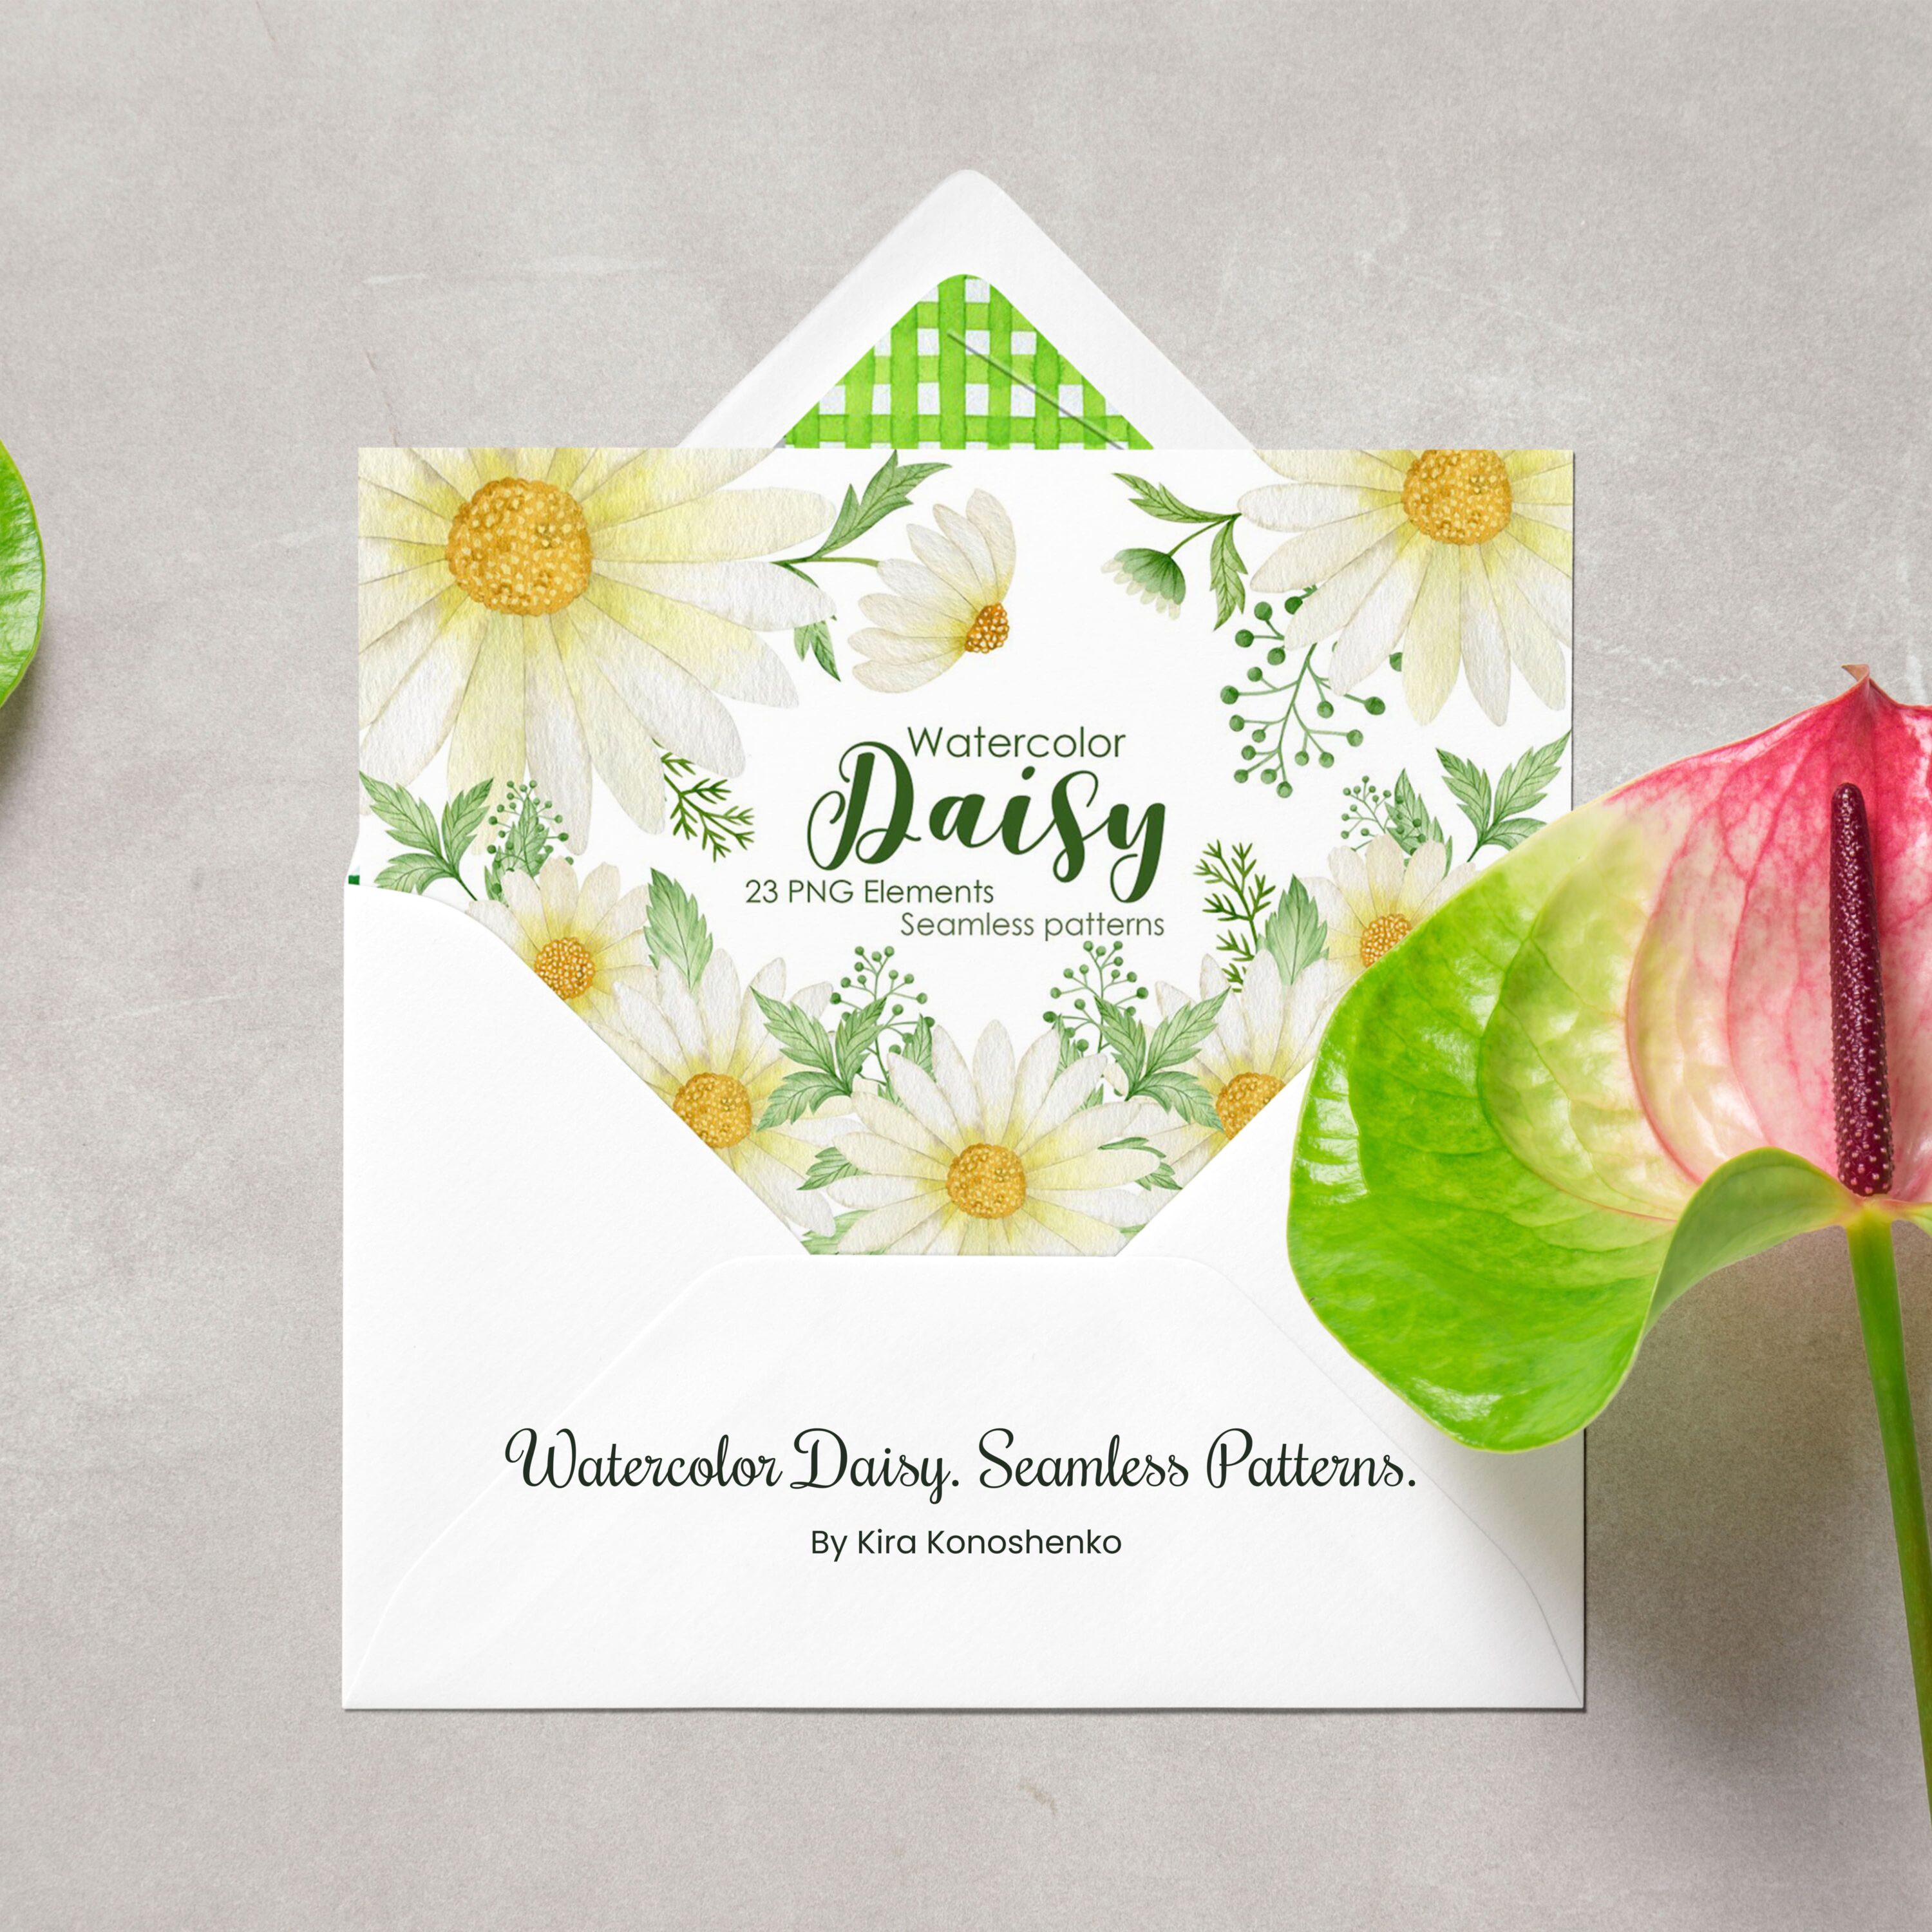 Watercolor Daisy. Seamless Patterns. cover.